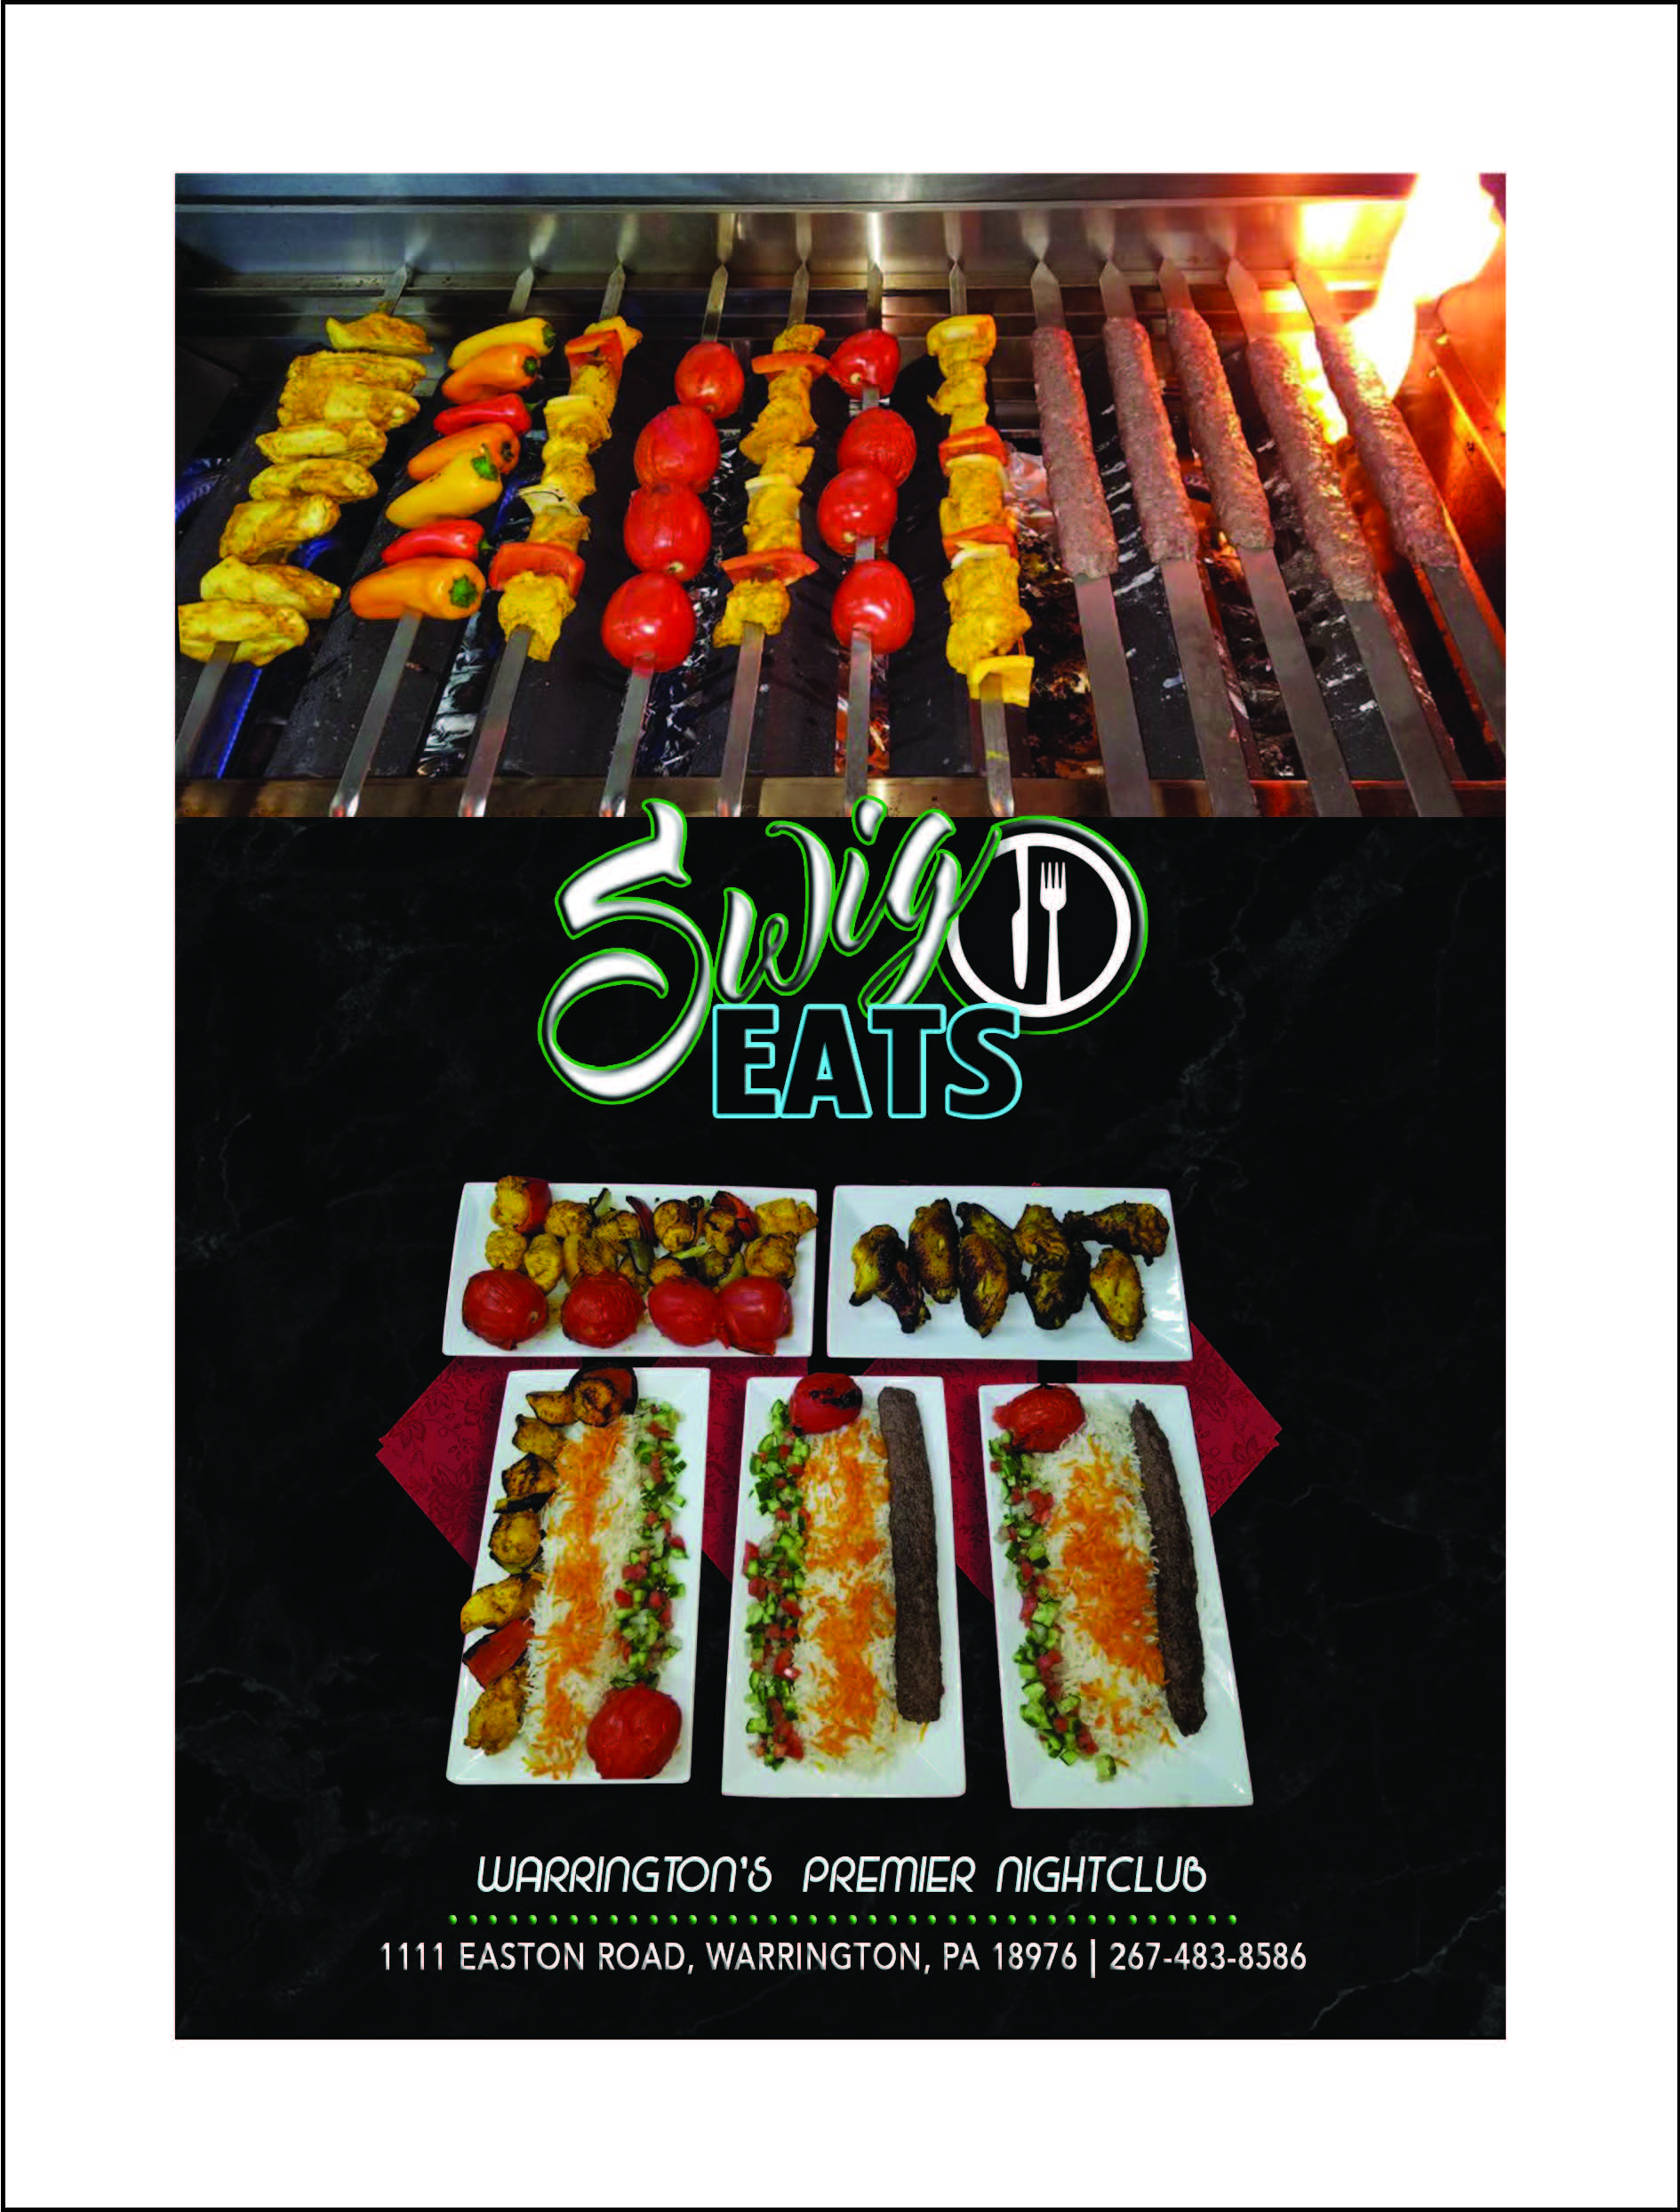 Image showing skewers of food being grilled above, and plates of mixed grilled dishes with rice and vegetables below. "Swig Eats" logo in the center, with address and contact info of a Warrington nightclub.